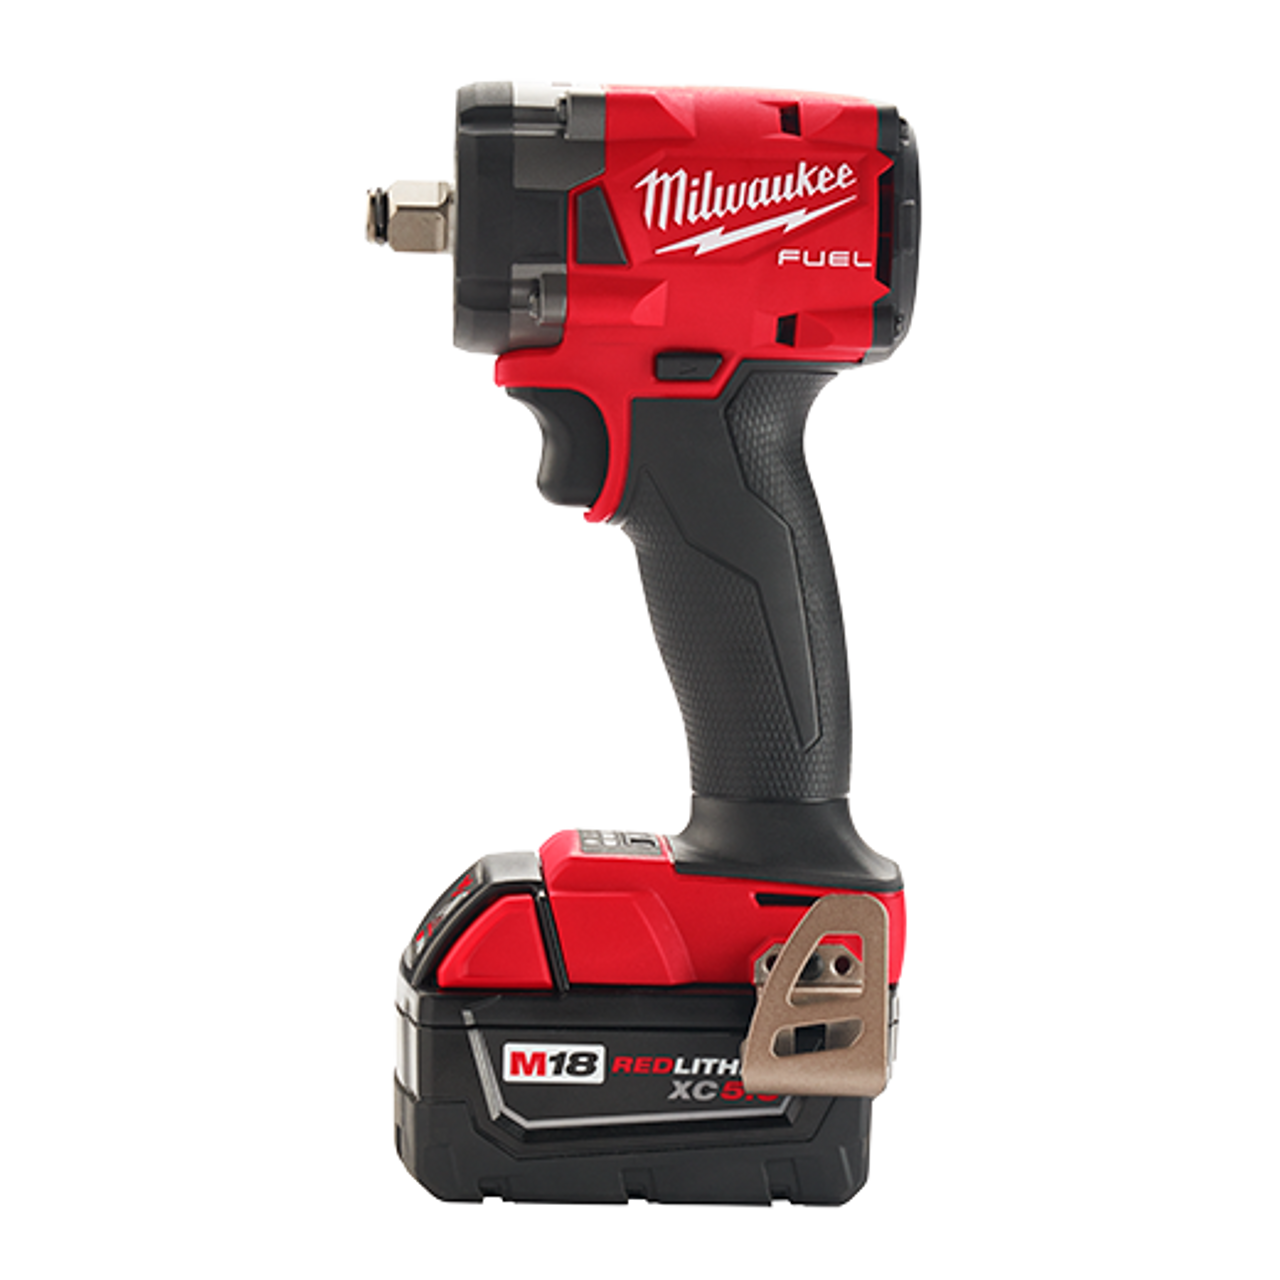 M18 FUEL 1/2 Compact Impact Wrench w/ Friction Ring Kit